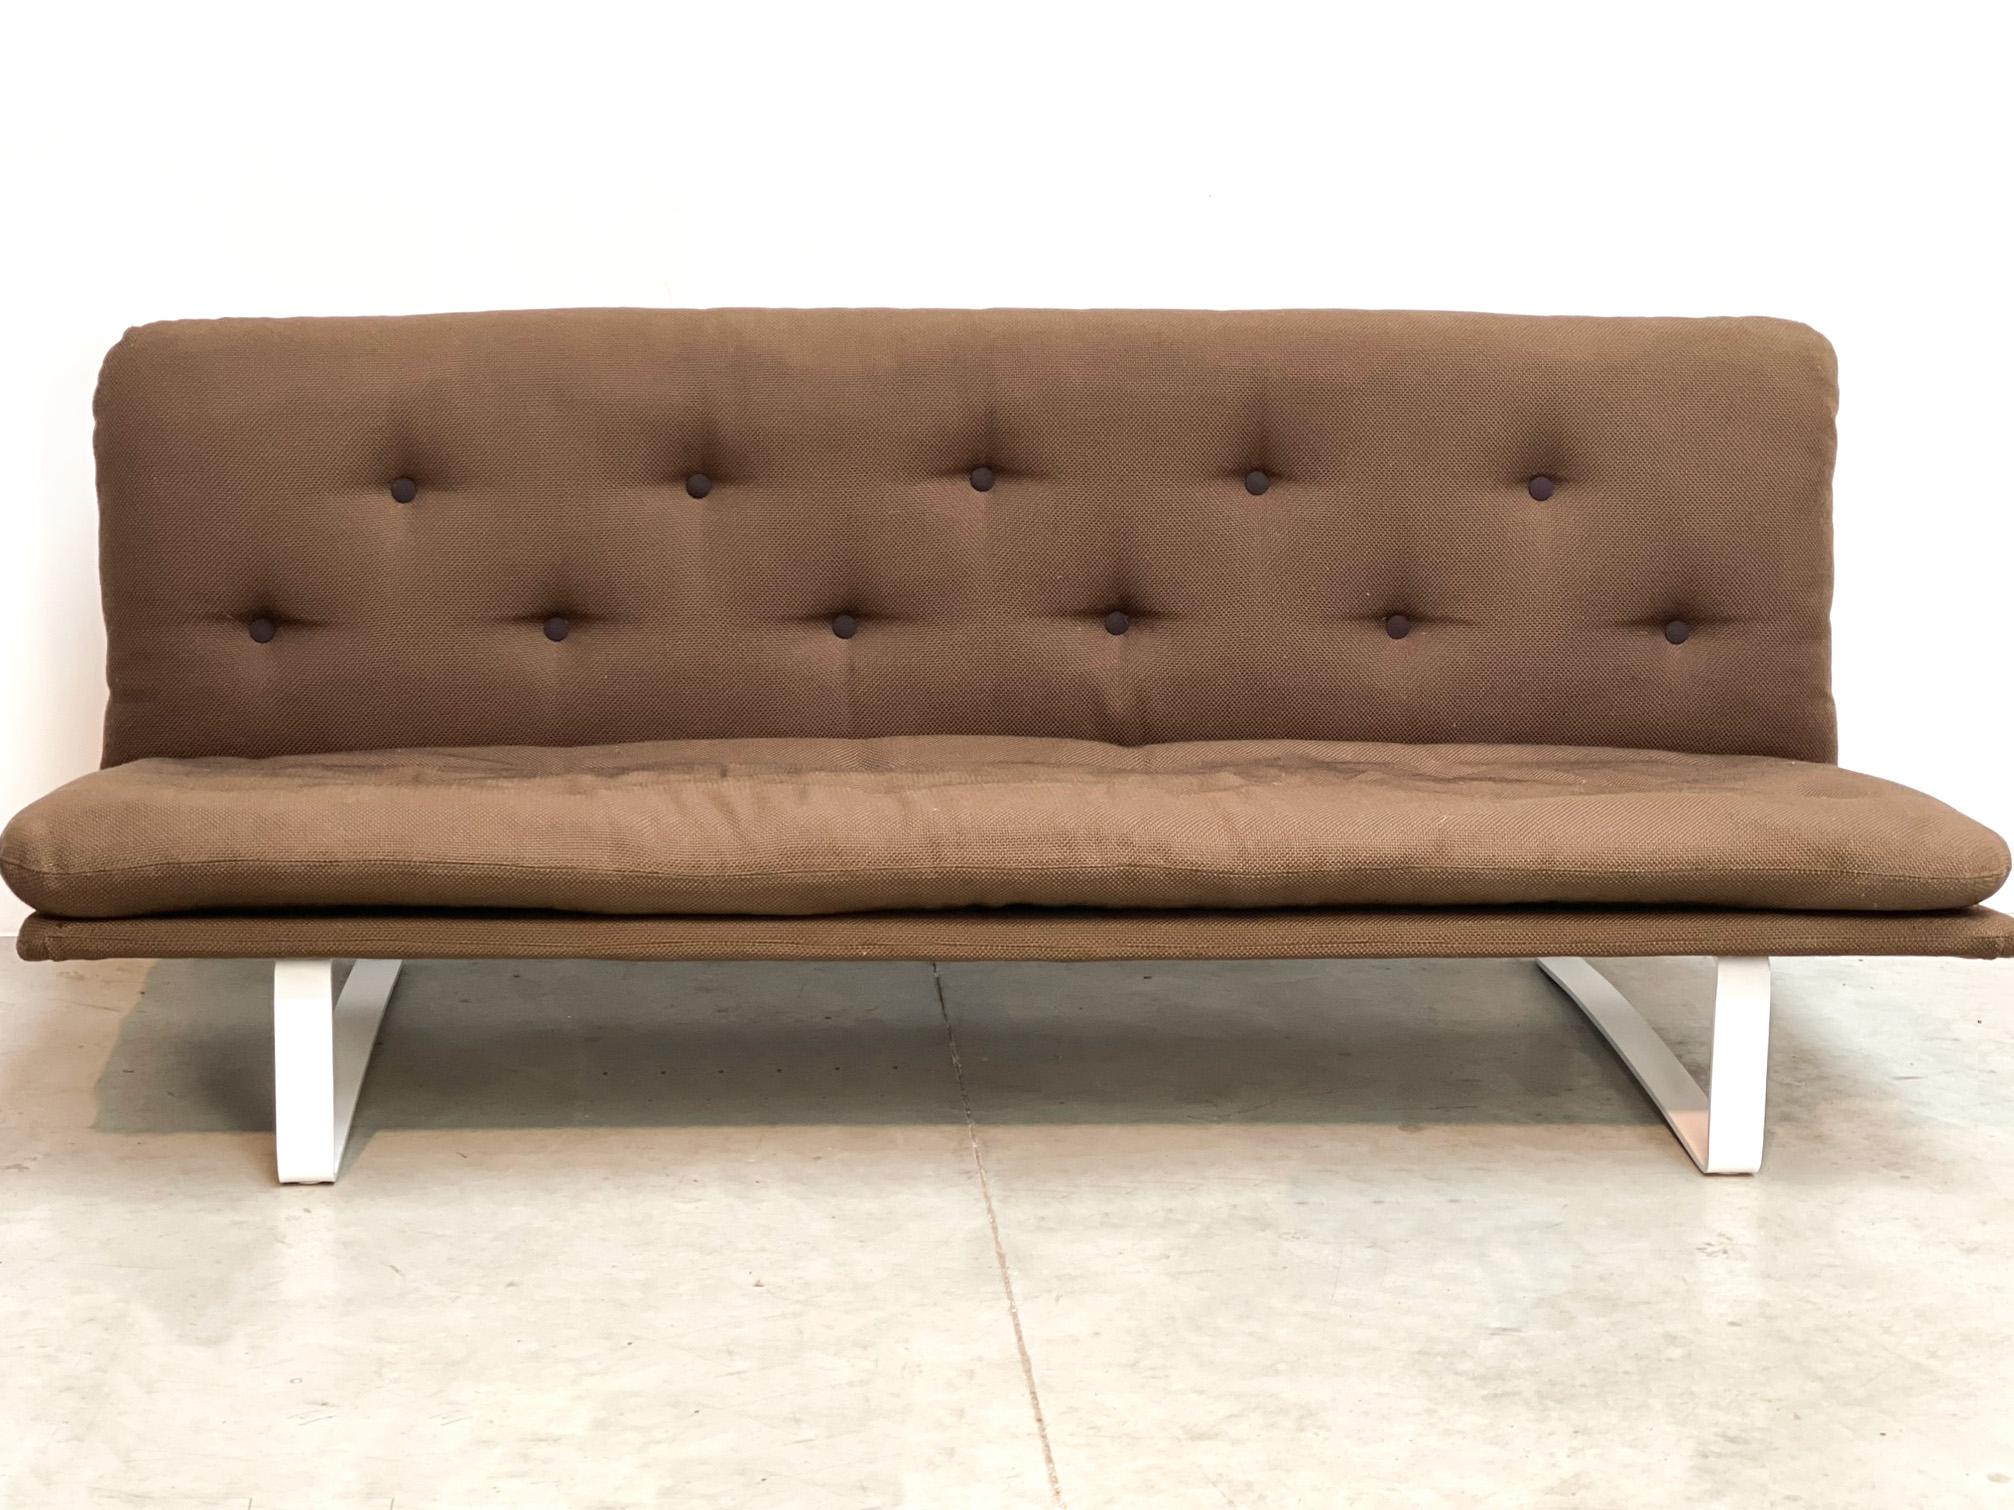 Less is more with this sofa. 

1970's brown sofa by famous dutch designer Kho Liang Le. Kho Lian Le designed this sofa for Artifort. This sofa is model C 684 sofa. 

It features a very 